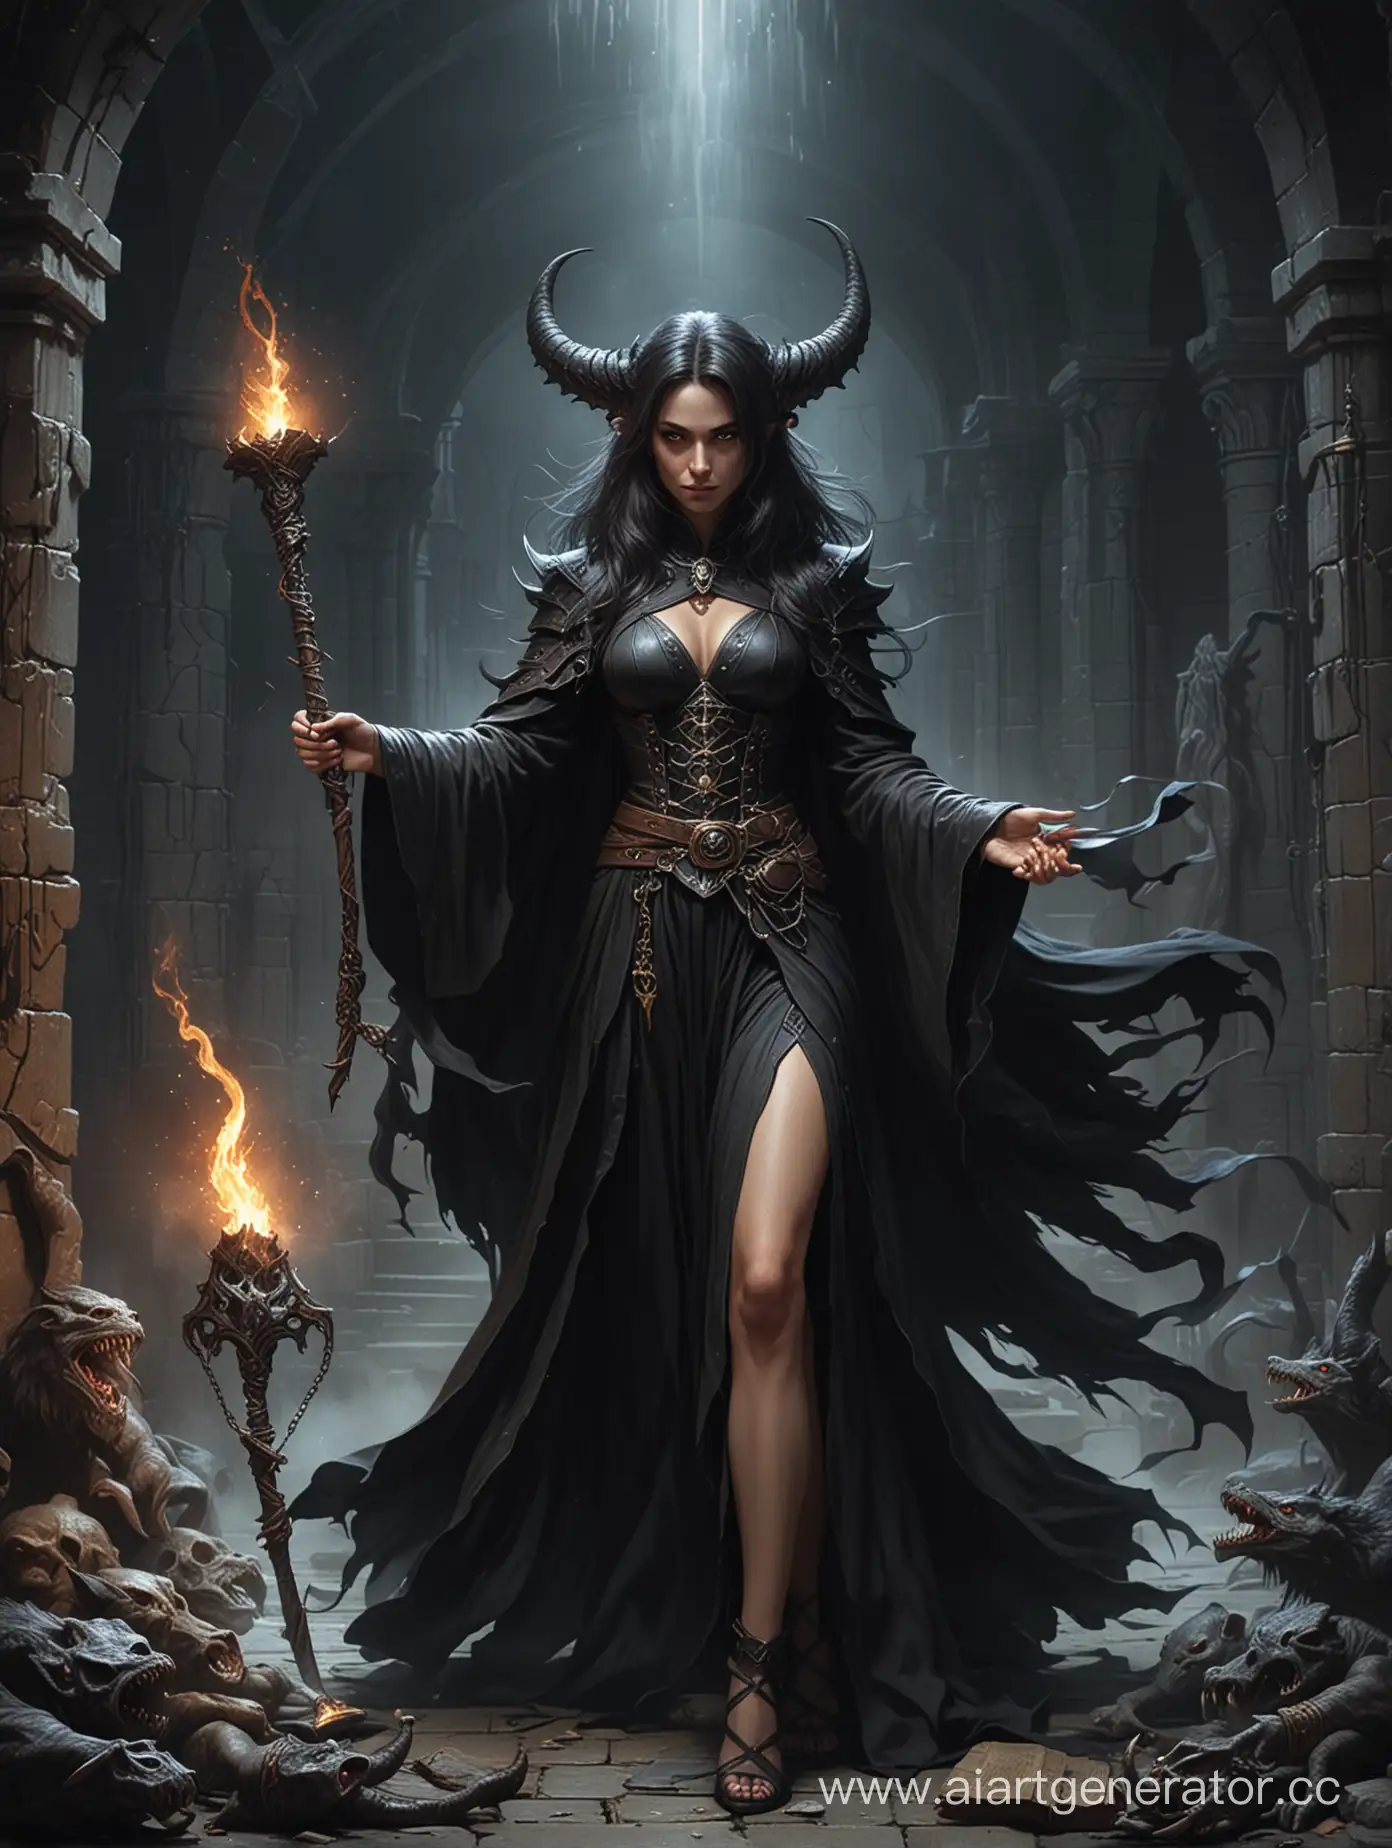 Enigmatic-Woman-in-Black-Robe-Conjuring-Creatures-in-Dungeon